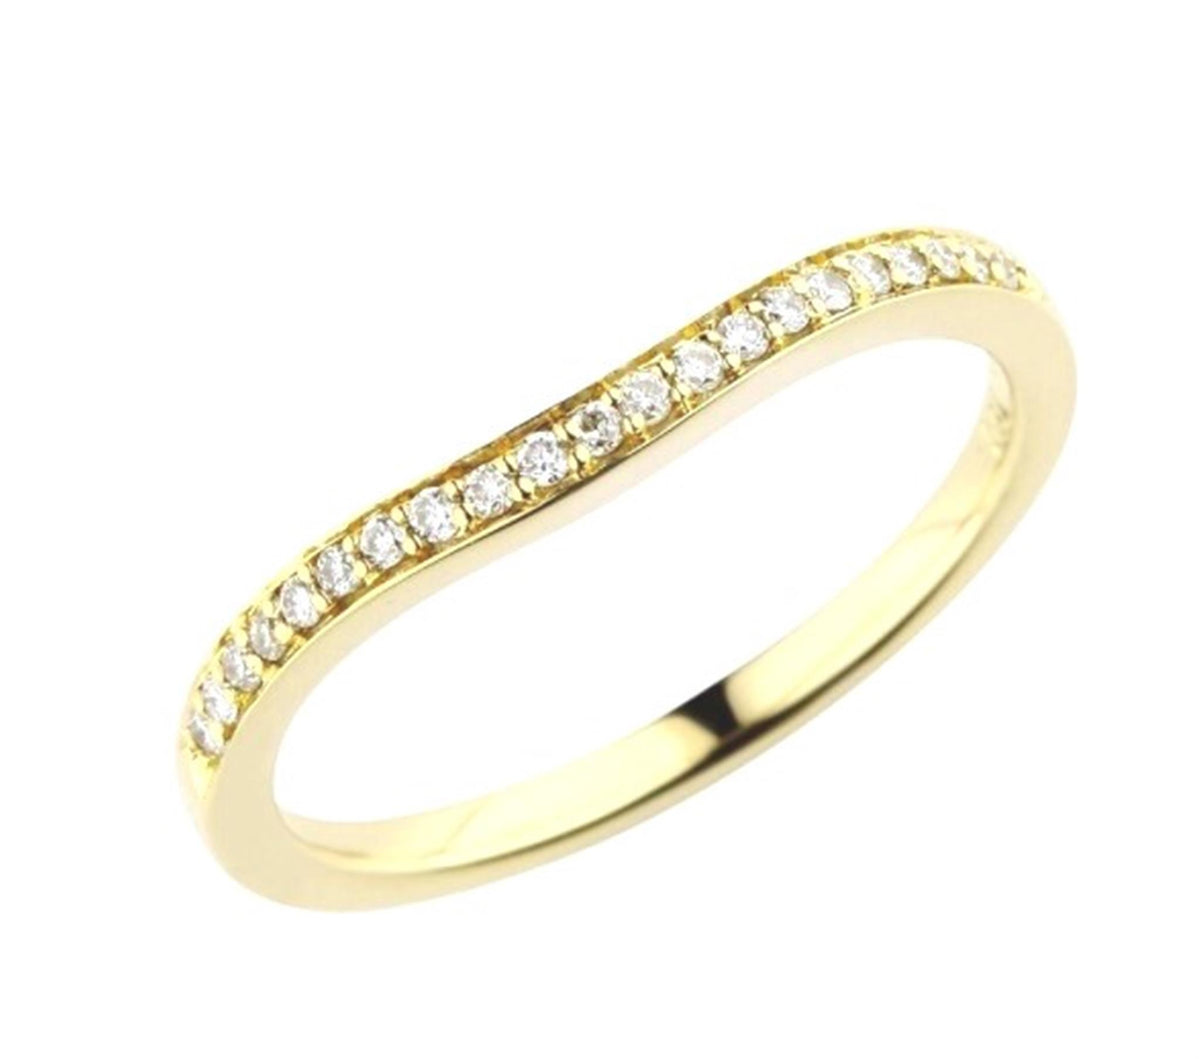 14Kt Yellow Gold Curved Wedding Ring With 0.11cttw Natural Diamonds